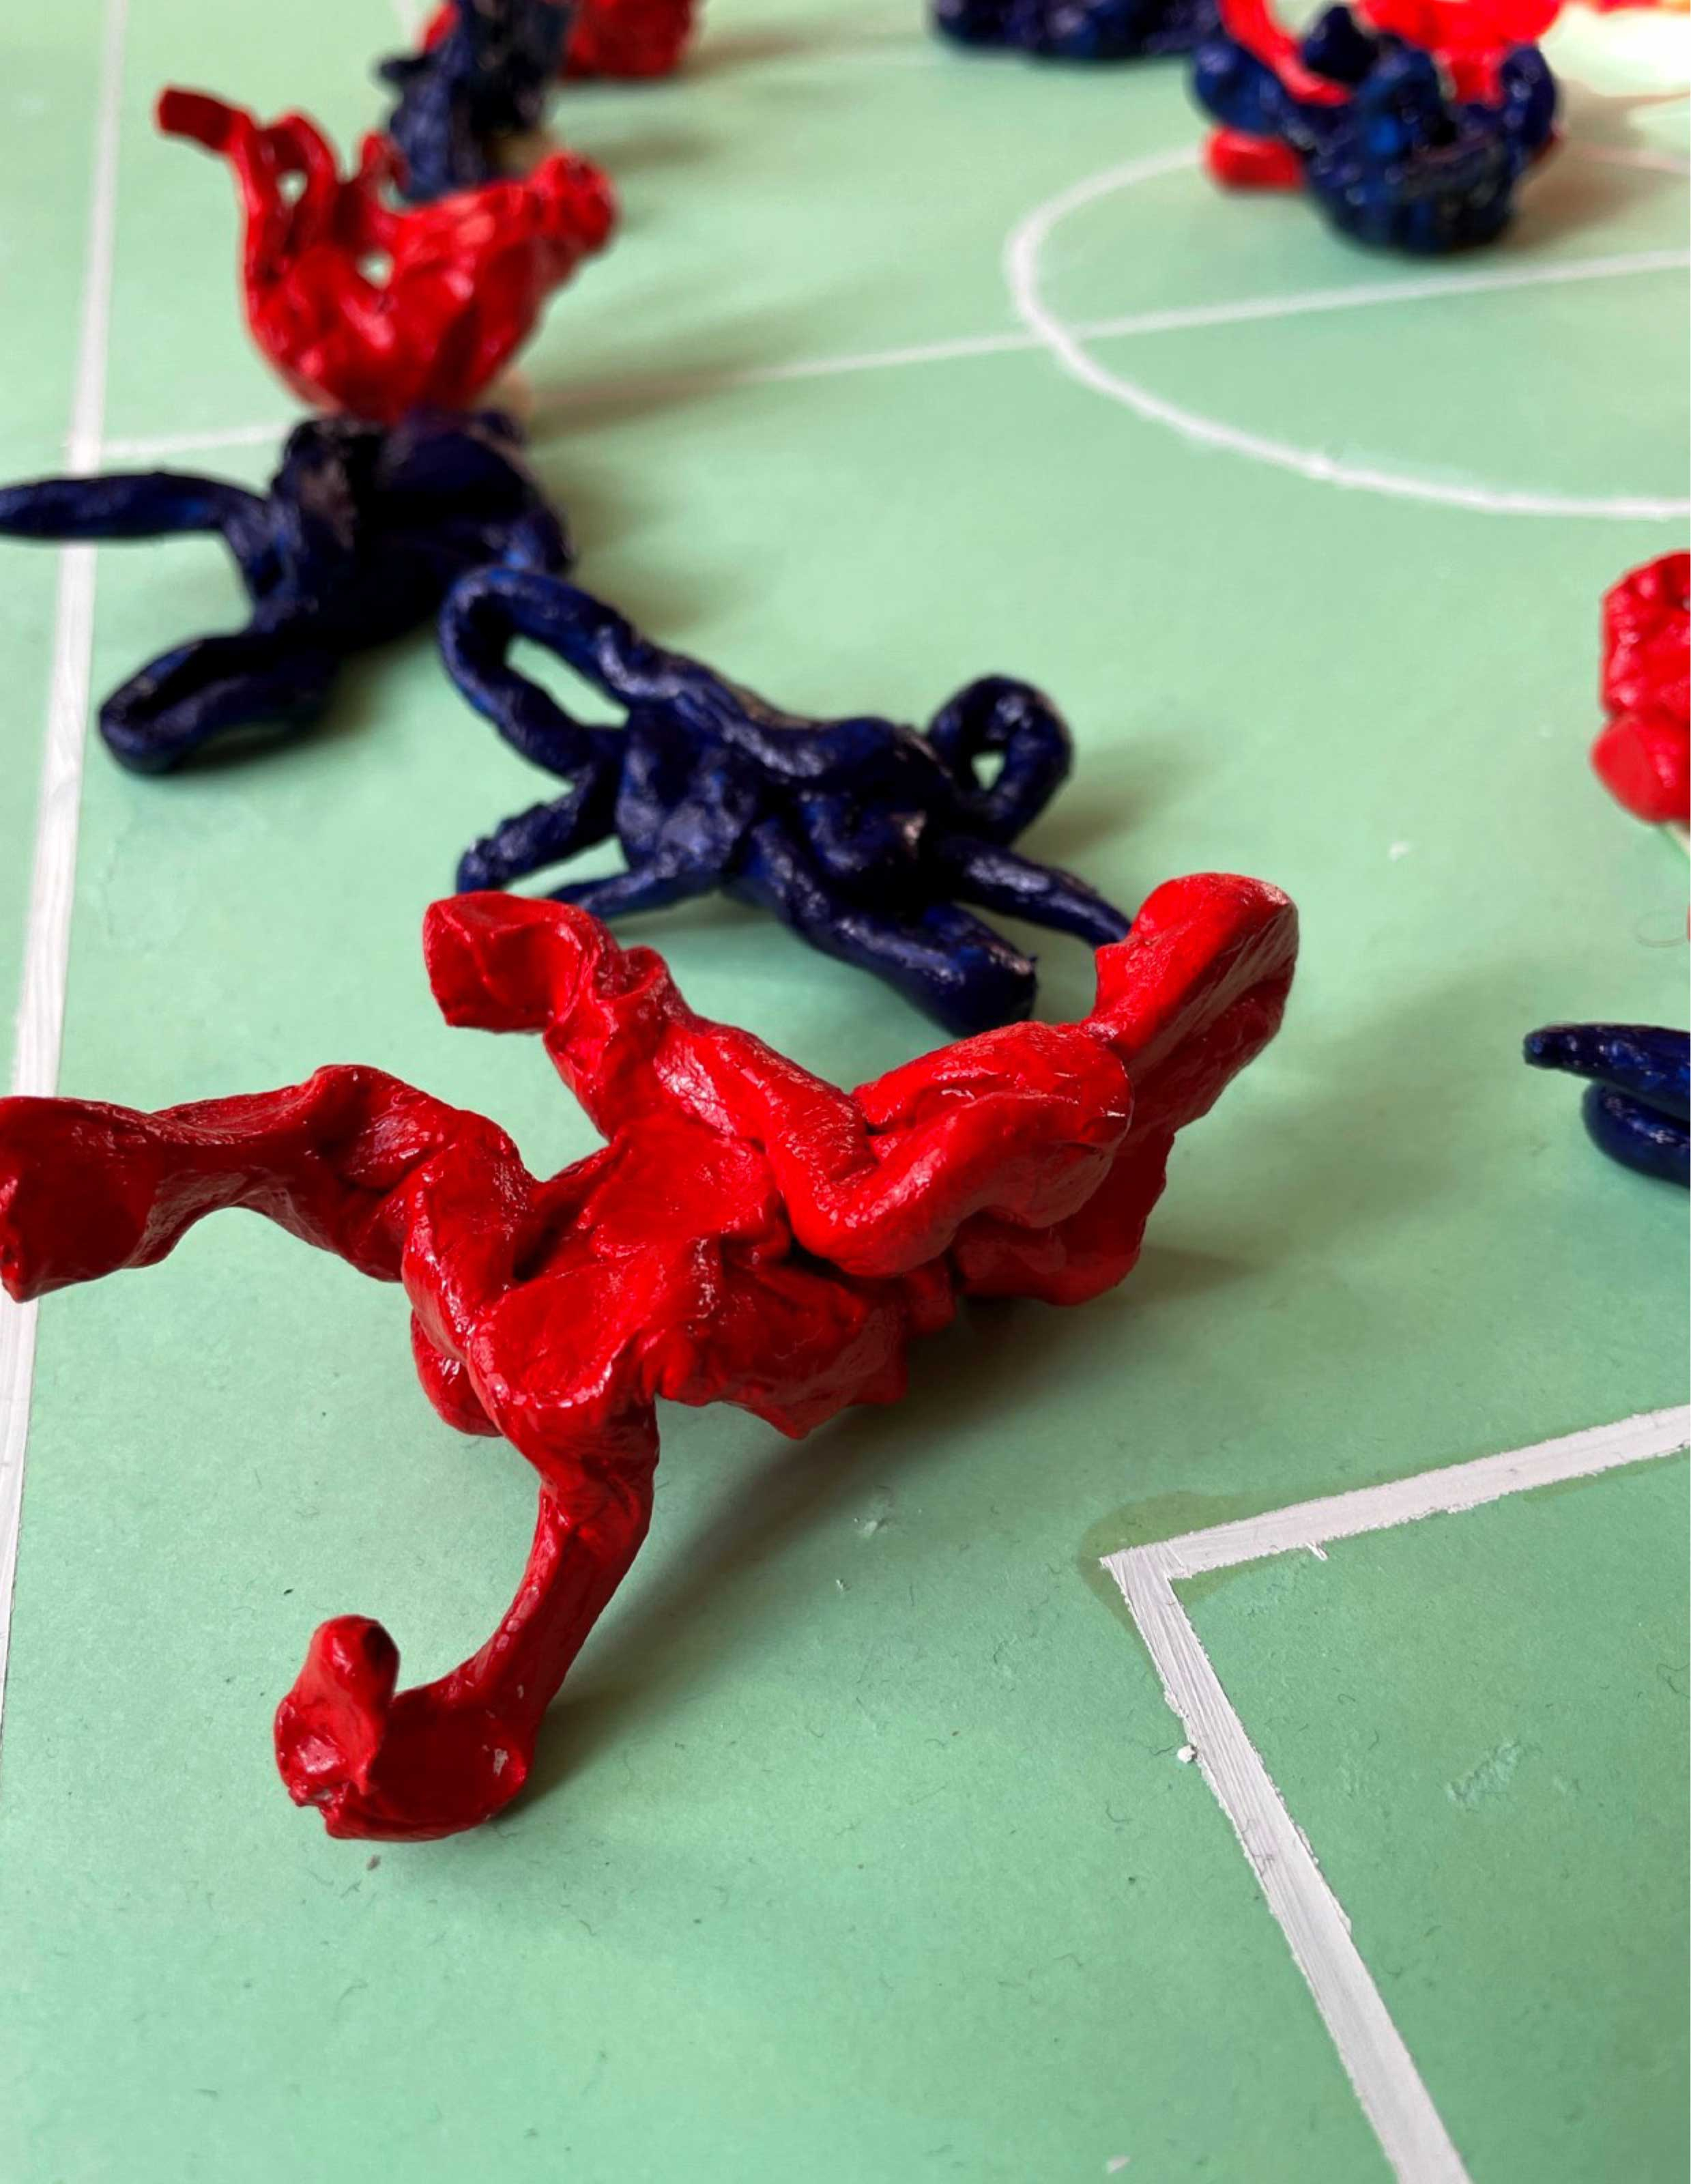 Detail image of small blue and red figures on model football pitch. 